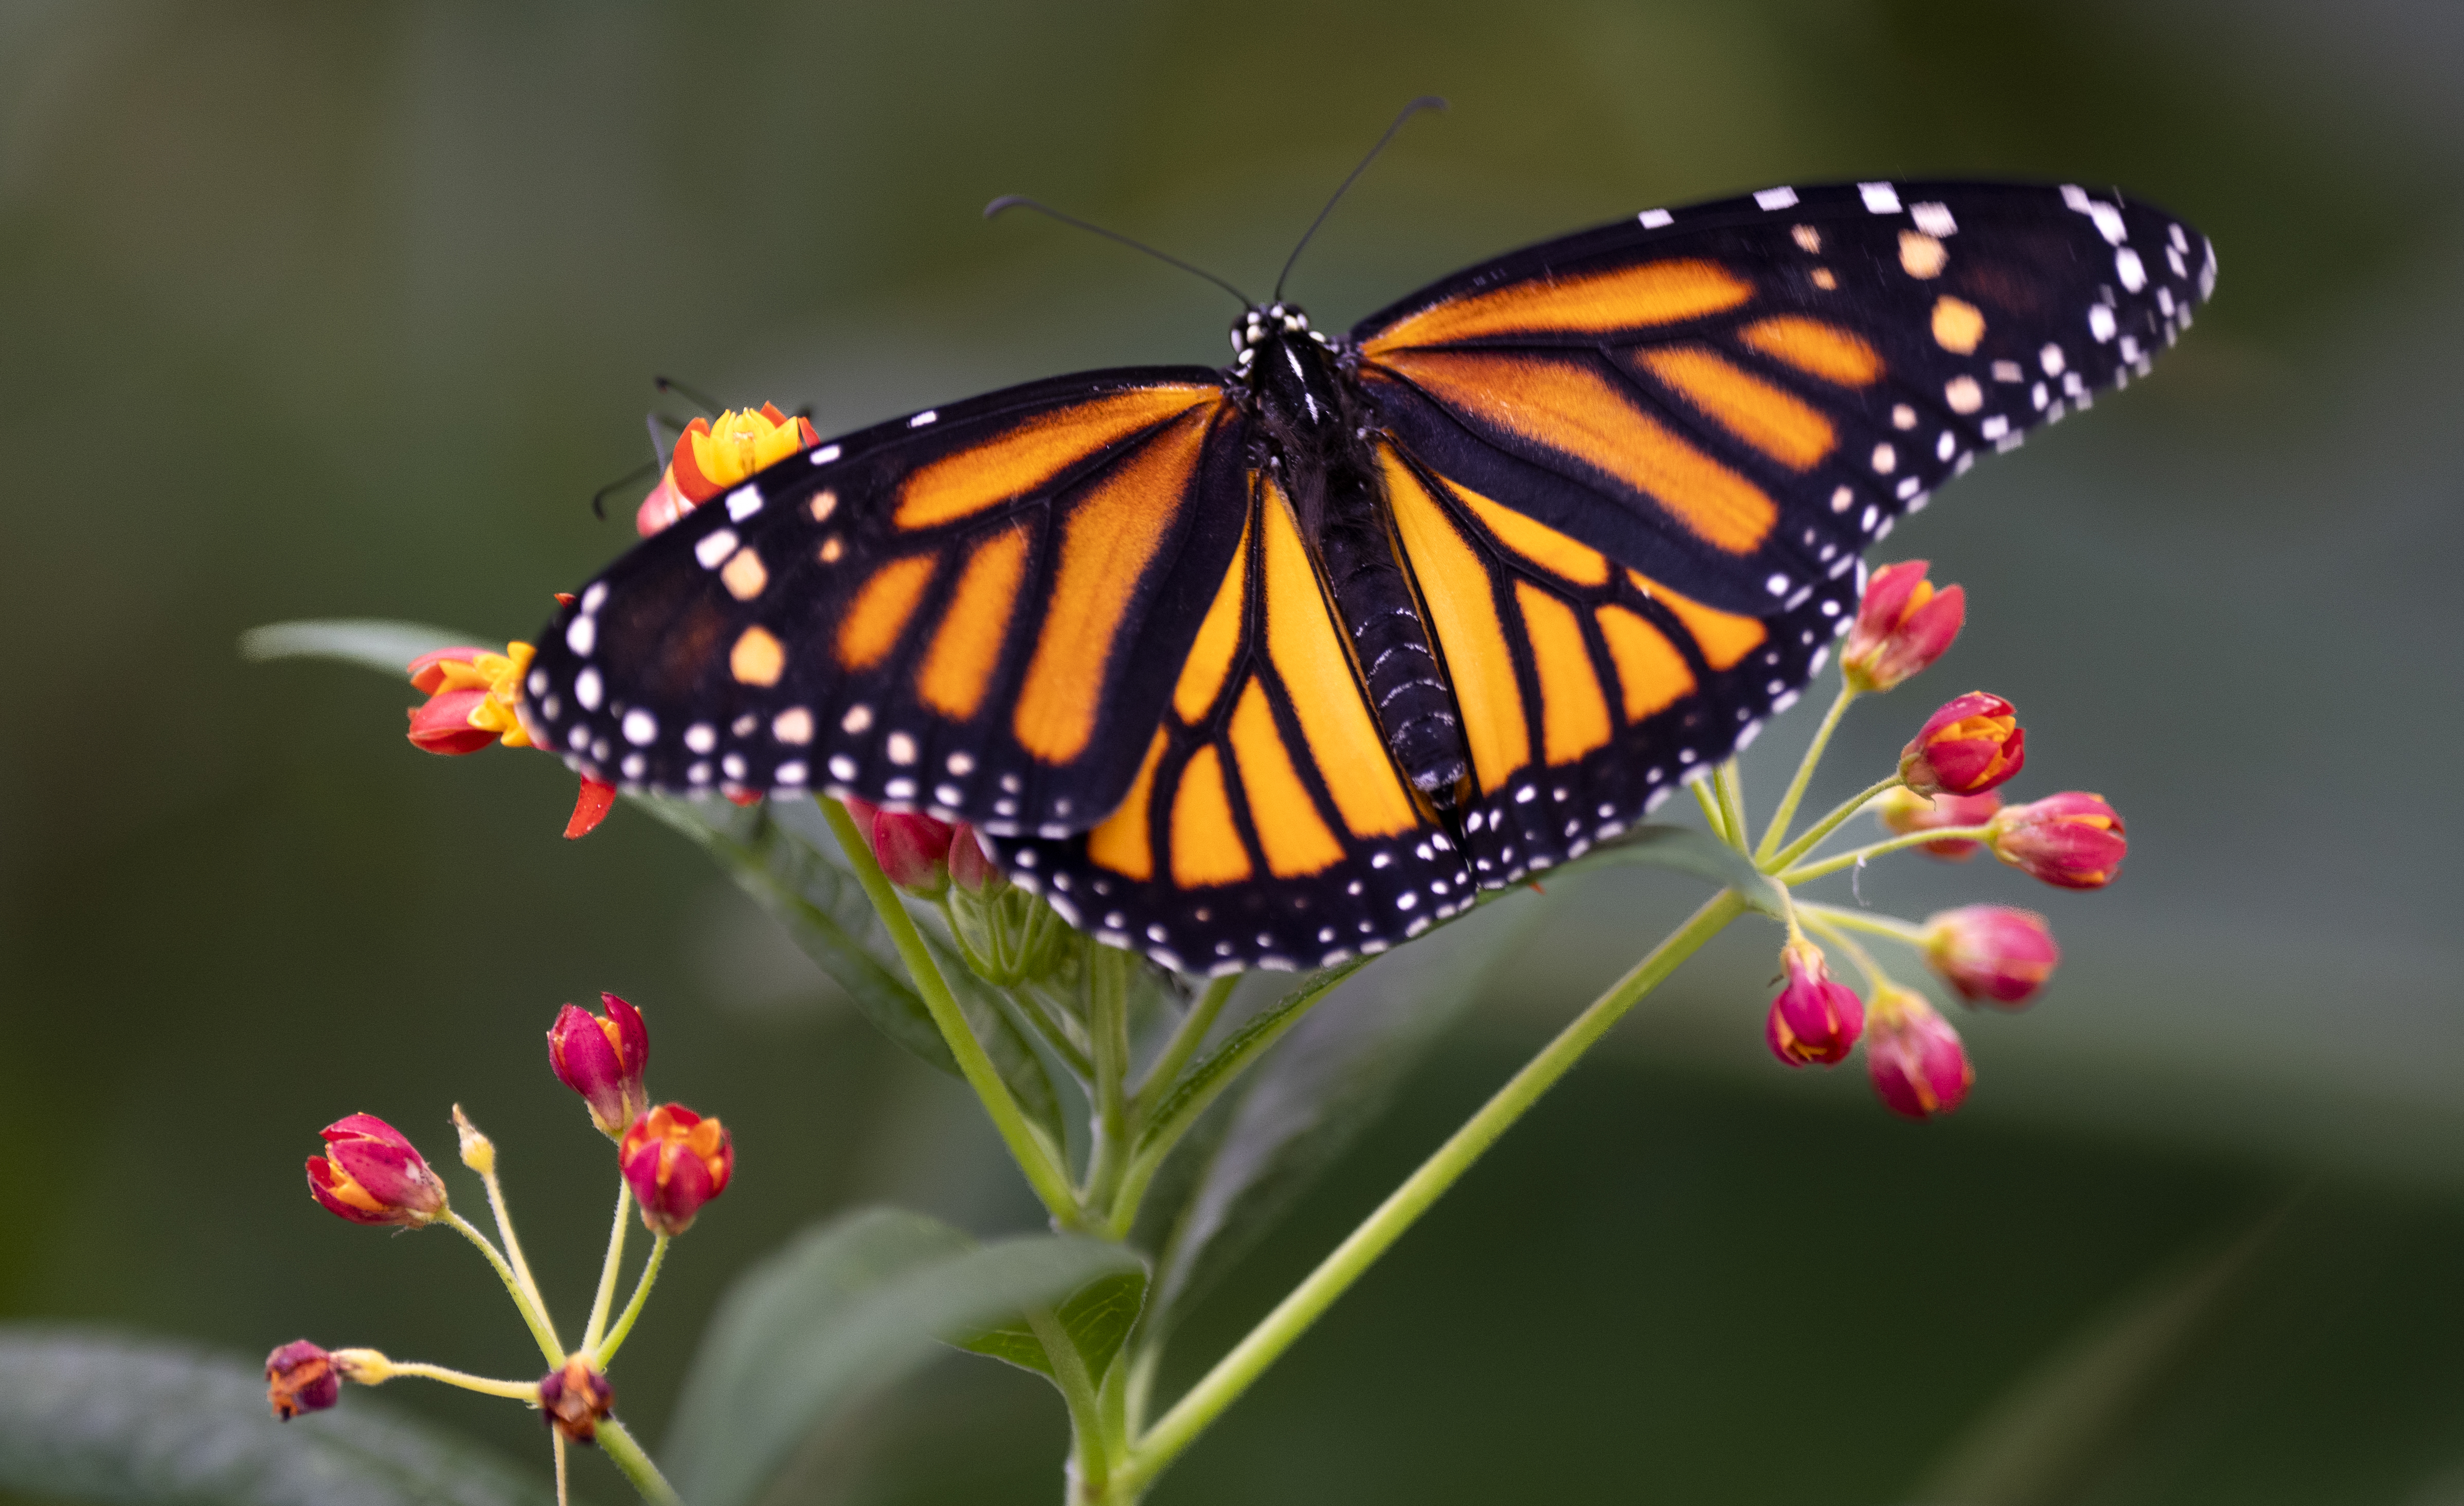 Monarch butterflies are now on Canada’s endangered species list